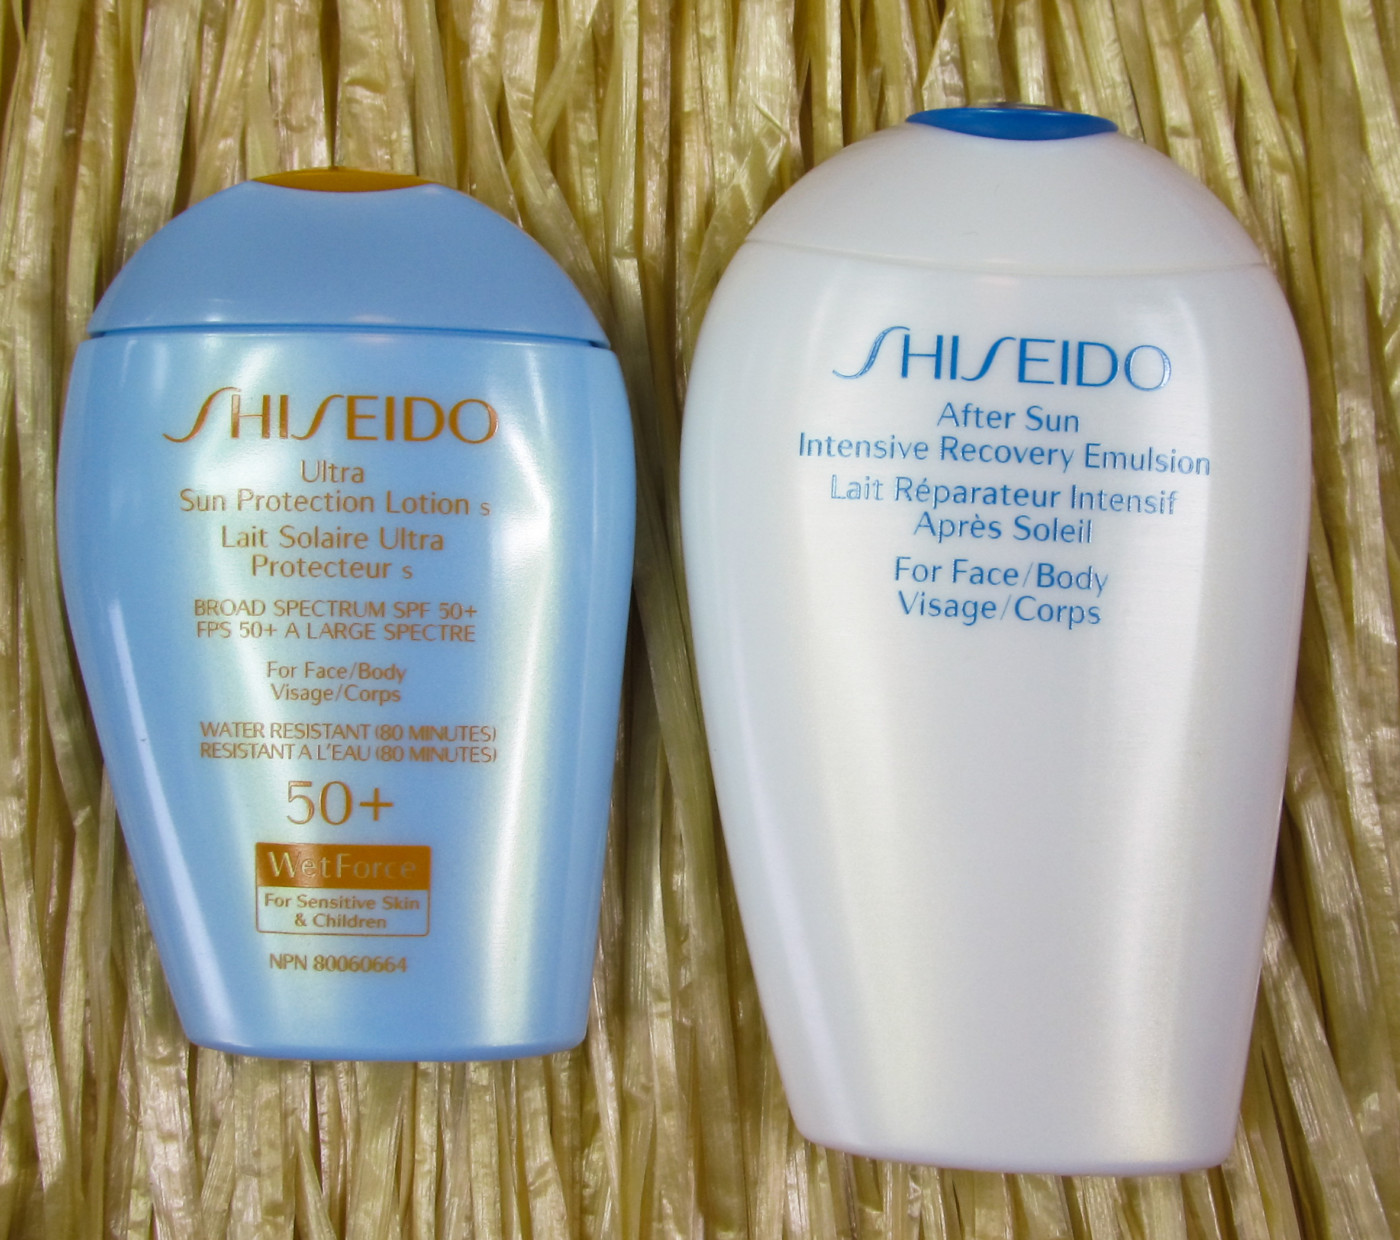 shiseido suncare, shiseido uv protective compact, shiseido uv protective stick foundation, shiseido ultra sun protection lotion, shiseido after sun intensive recovery emulsion, makeup with sunscreen in it, what makeup should i wear to the beach, what makeup has spf in it, how can i protect my skin from the sun, shiseido sun protection, best sunscreen for sensitive skin, sunscreen sensitive skin, how can i protect my skin from the sun, what to pack on vacation